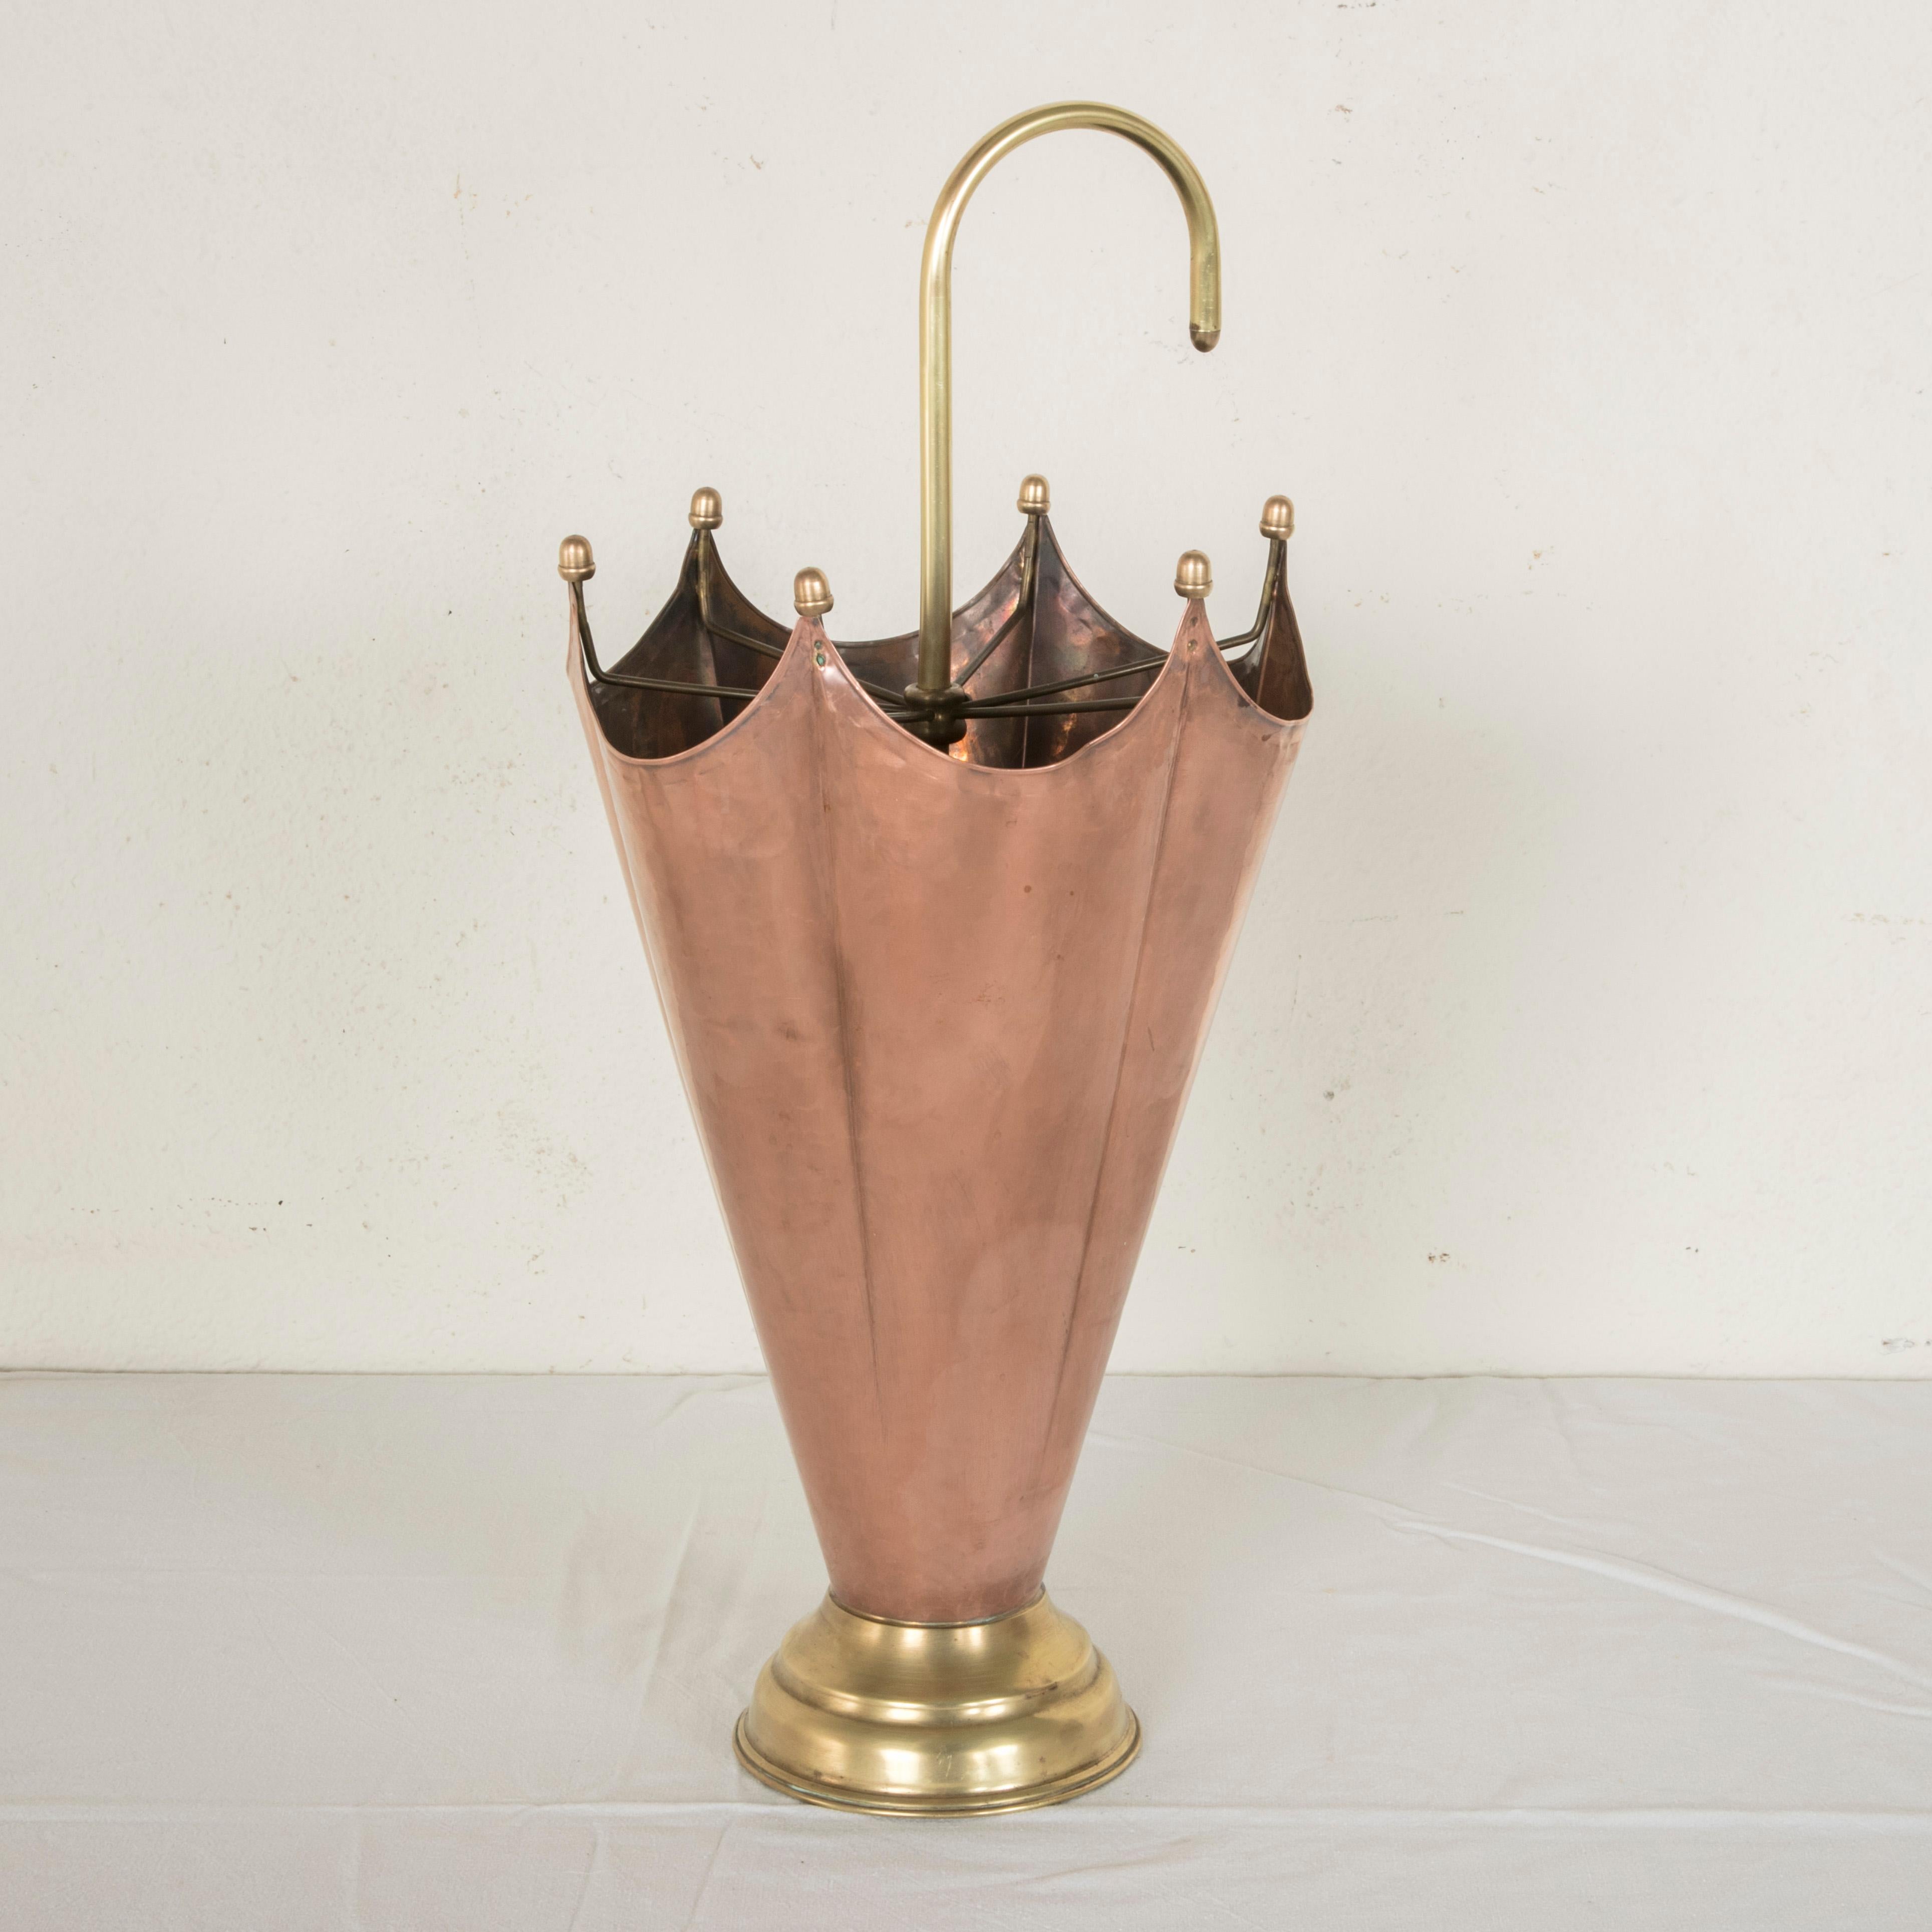 This midcentury copper and brass umbrella stand takes the form of an open umbrella resting on a brass footed base. Found in Normandy, France, this piece will add charm as well as function to any entryway. Base measures 6.25 inches in diameter, circa